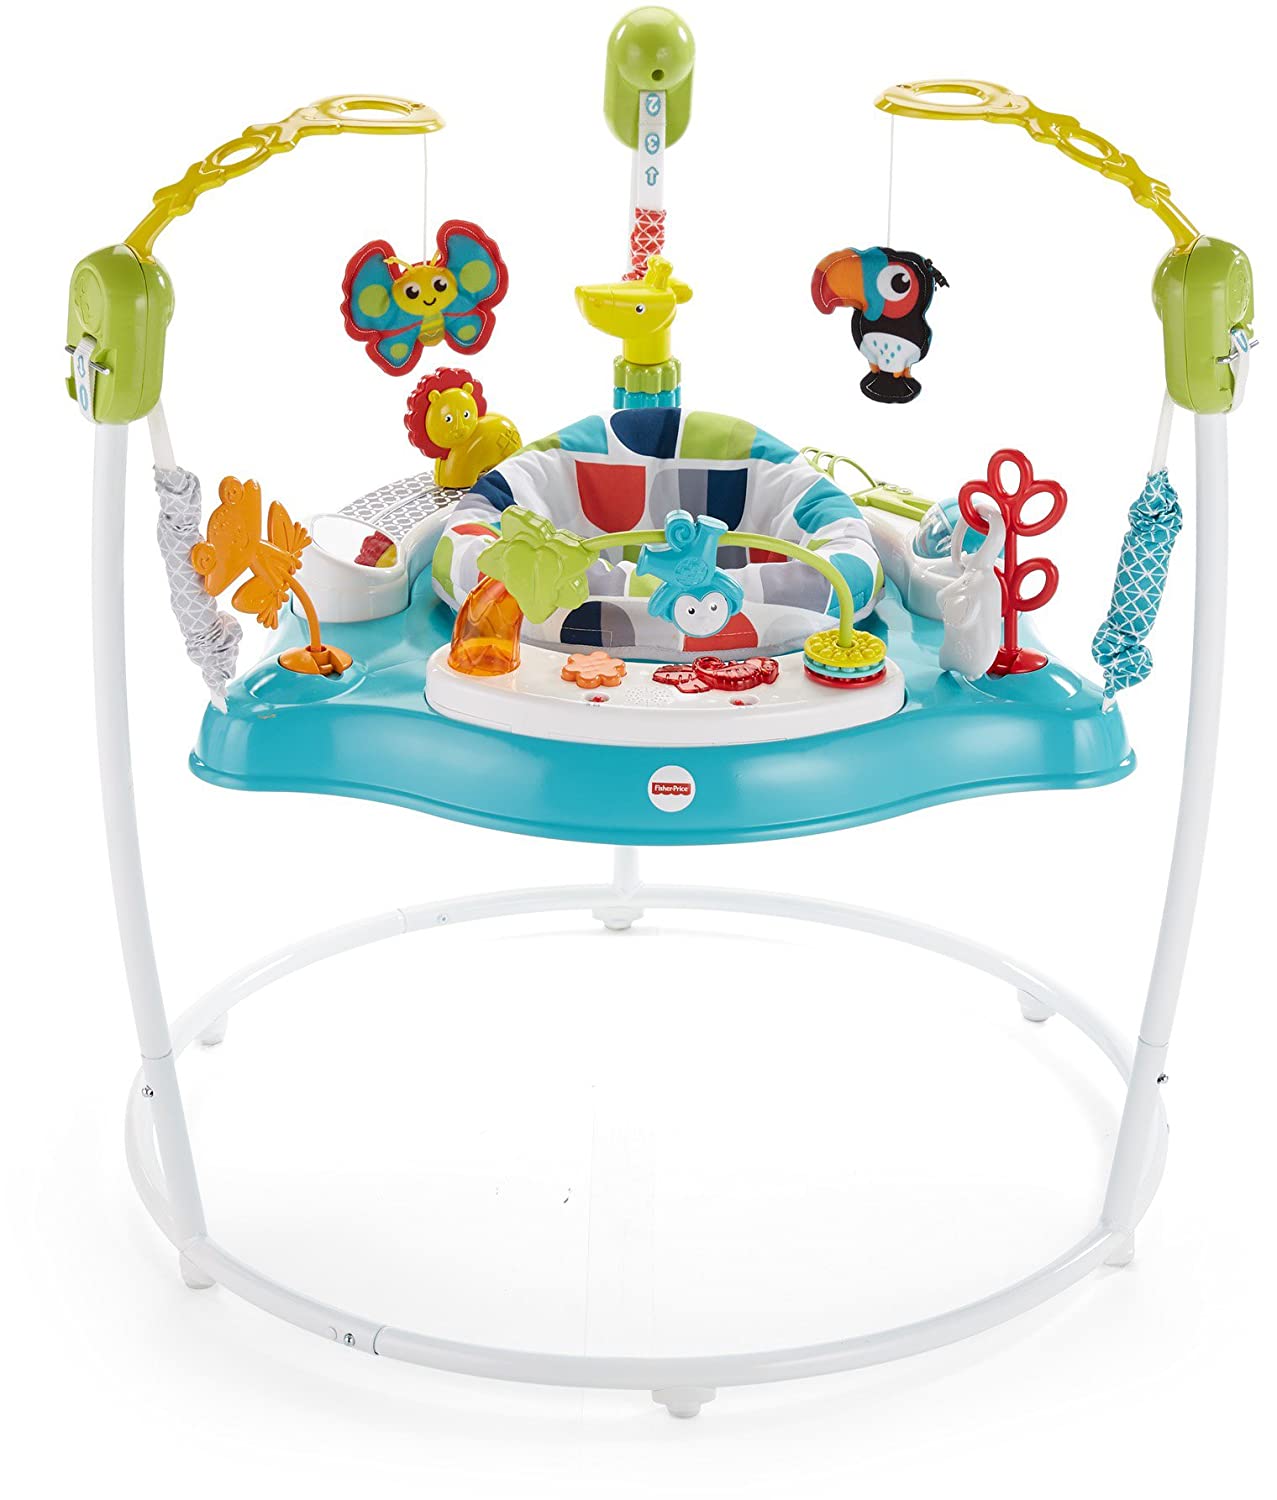 7 Best Fisher Price Jumperoo Reviews in 2023 6